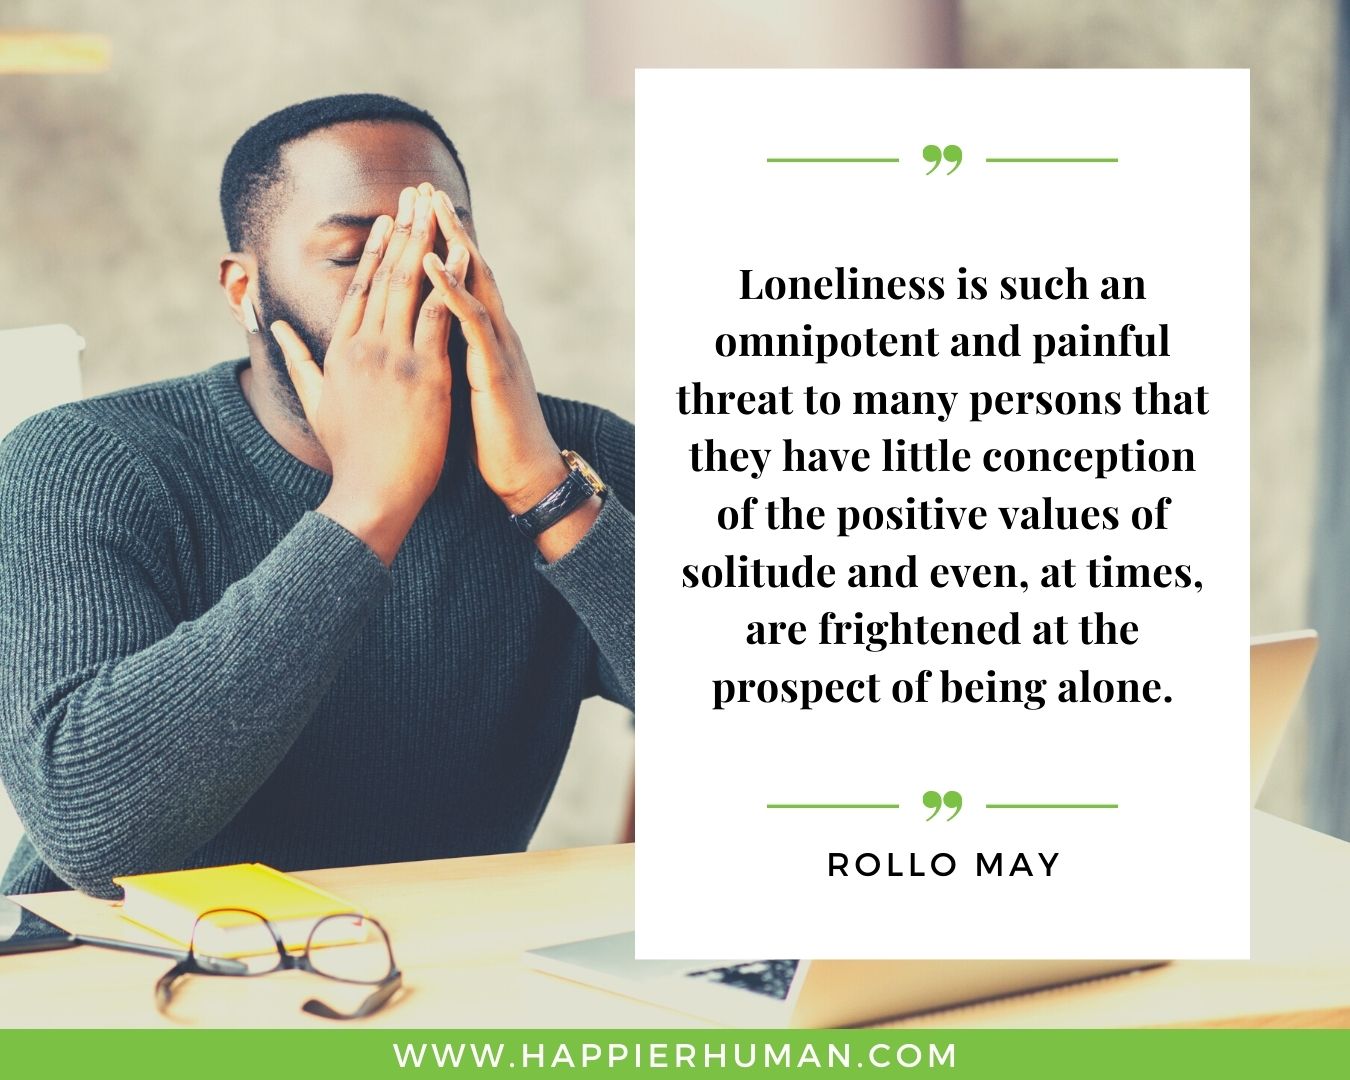 Loneliness Quotes - “Loneliness is such an omnipotent and painful threat to many persons that they have little conception of the positive values of solitude and even, at times, are frightened at the prospect of being alone.”– Rollo May